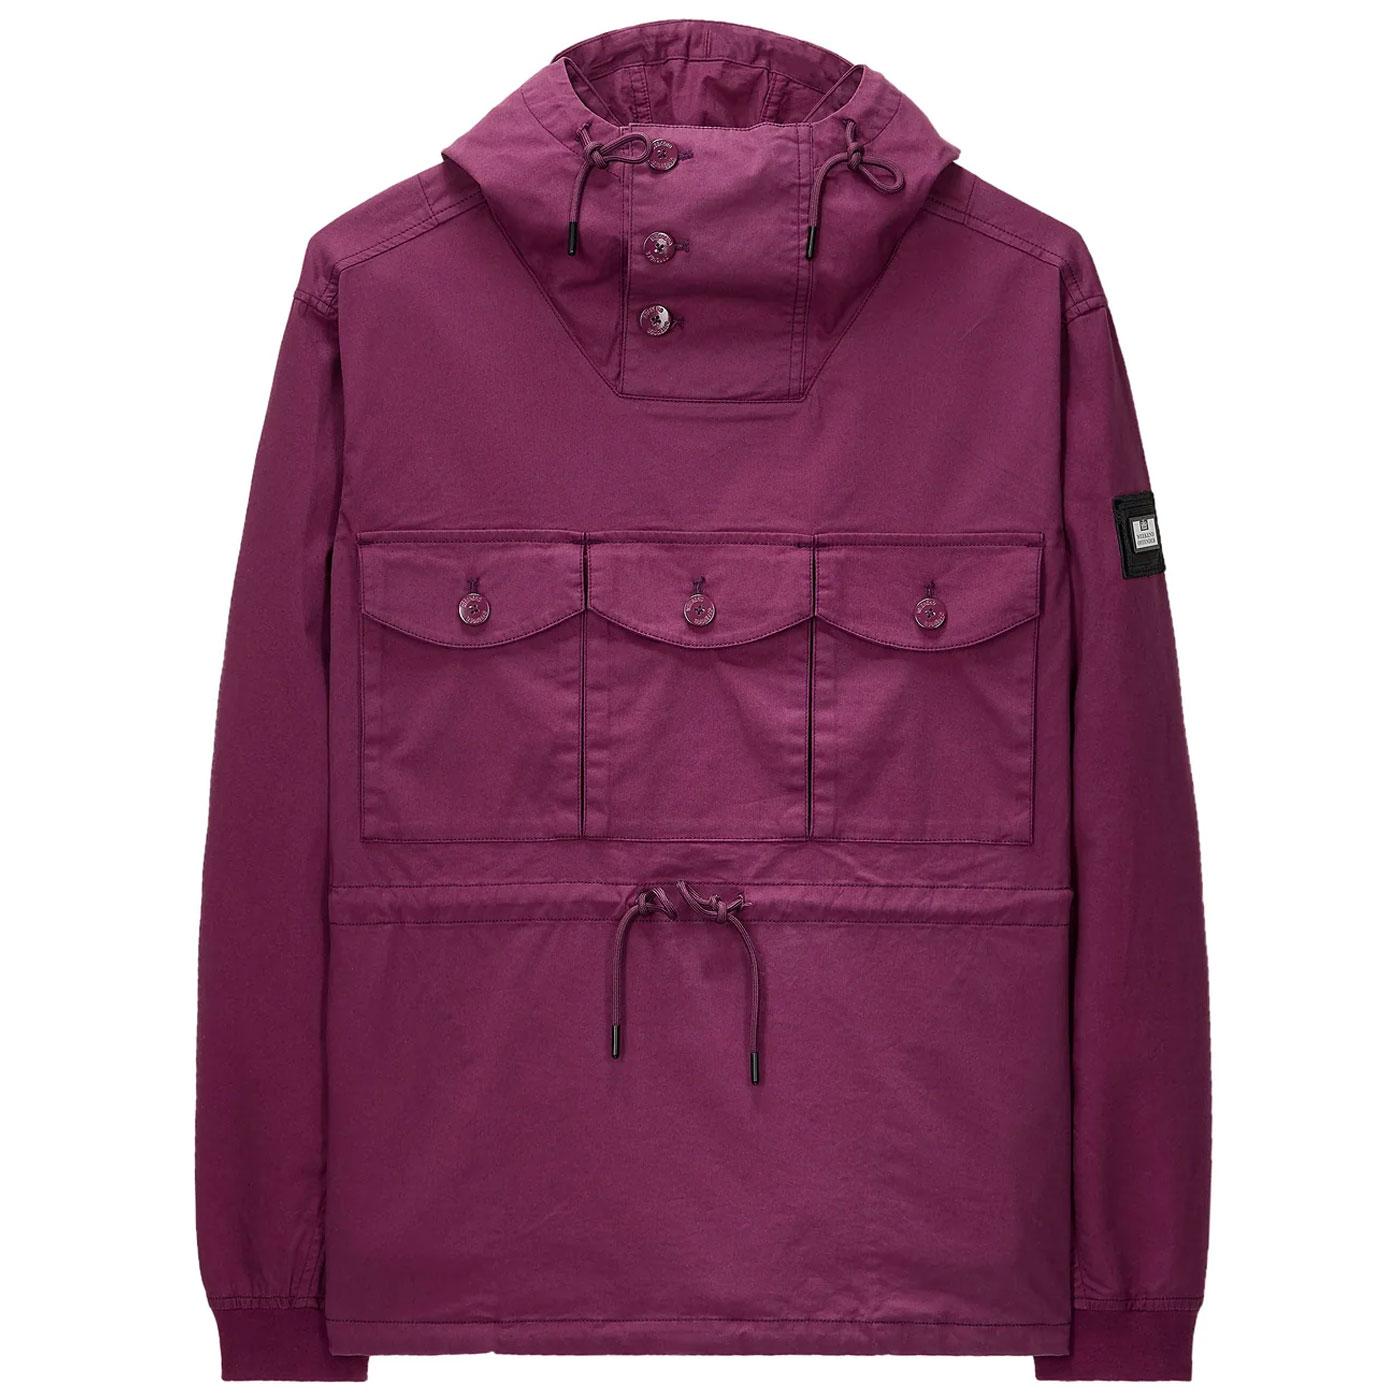 Kovags Weekend Offender Retro 3 Pocket Over-Top DP